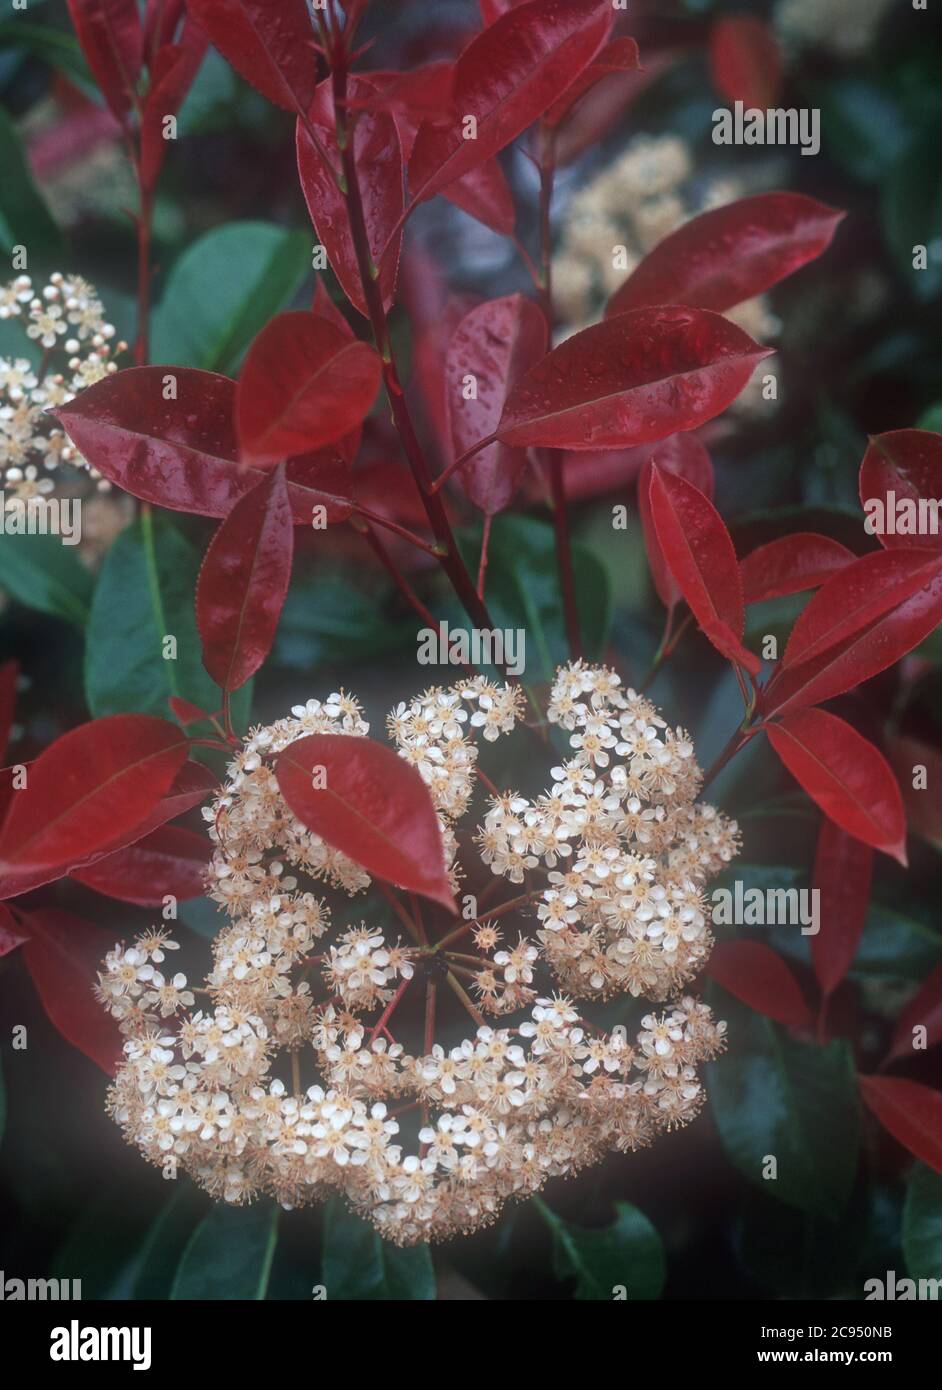 CLOSE-UP OF THE FLOWERS AND LEAVES OF A PHOTINIA ( X FRASERI) BUSH, SYDNEY, NEW SOUTH WALES, AUSTRALIA. Stock Photo